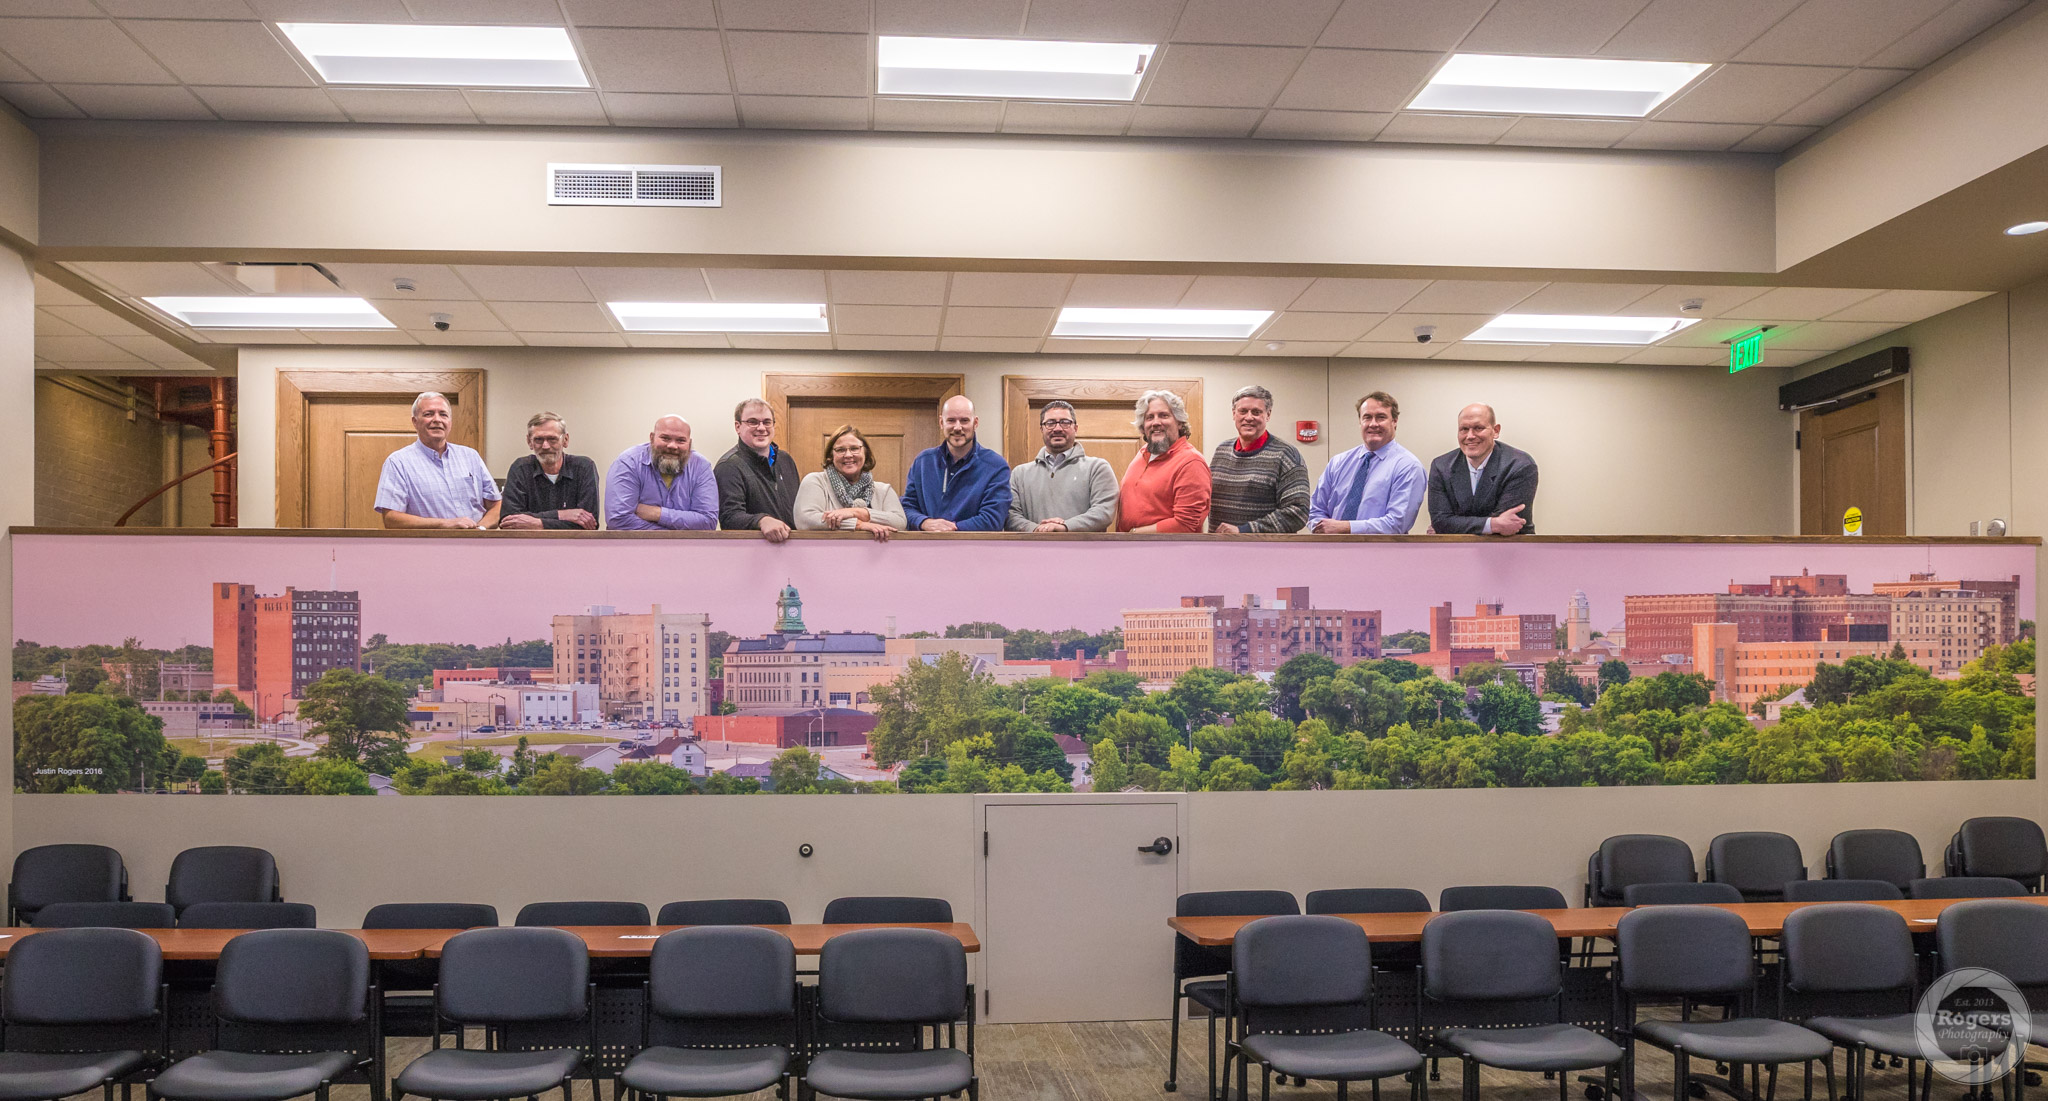 Fort Dodge skyline 32'x4' mural dedication in City Council Chambers